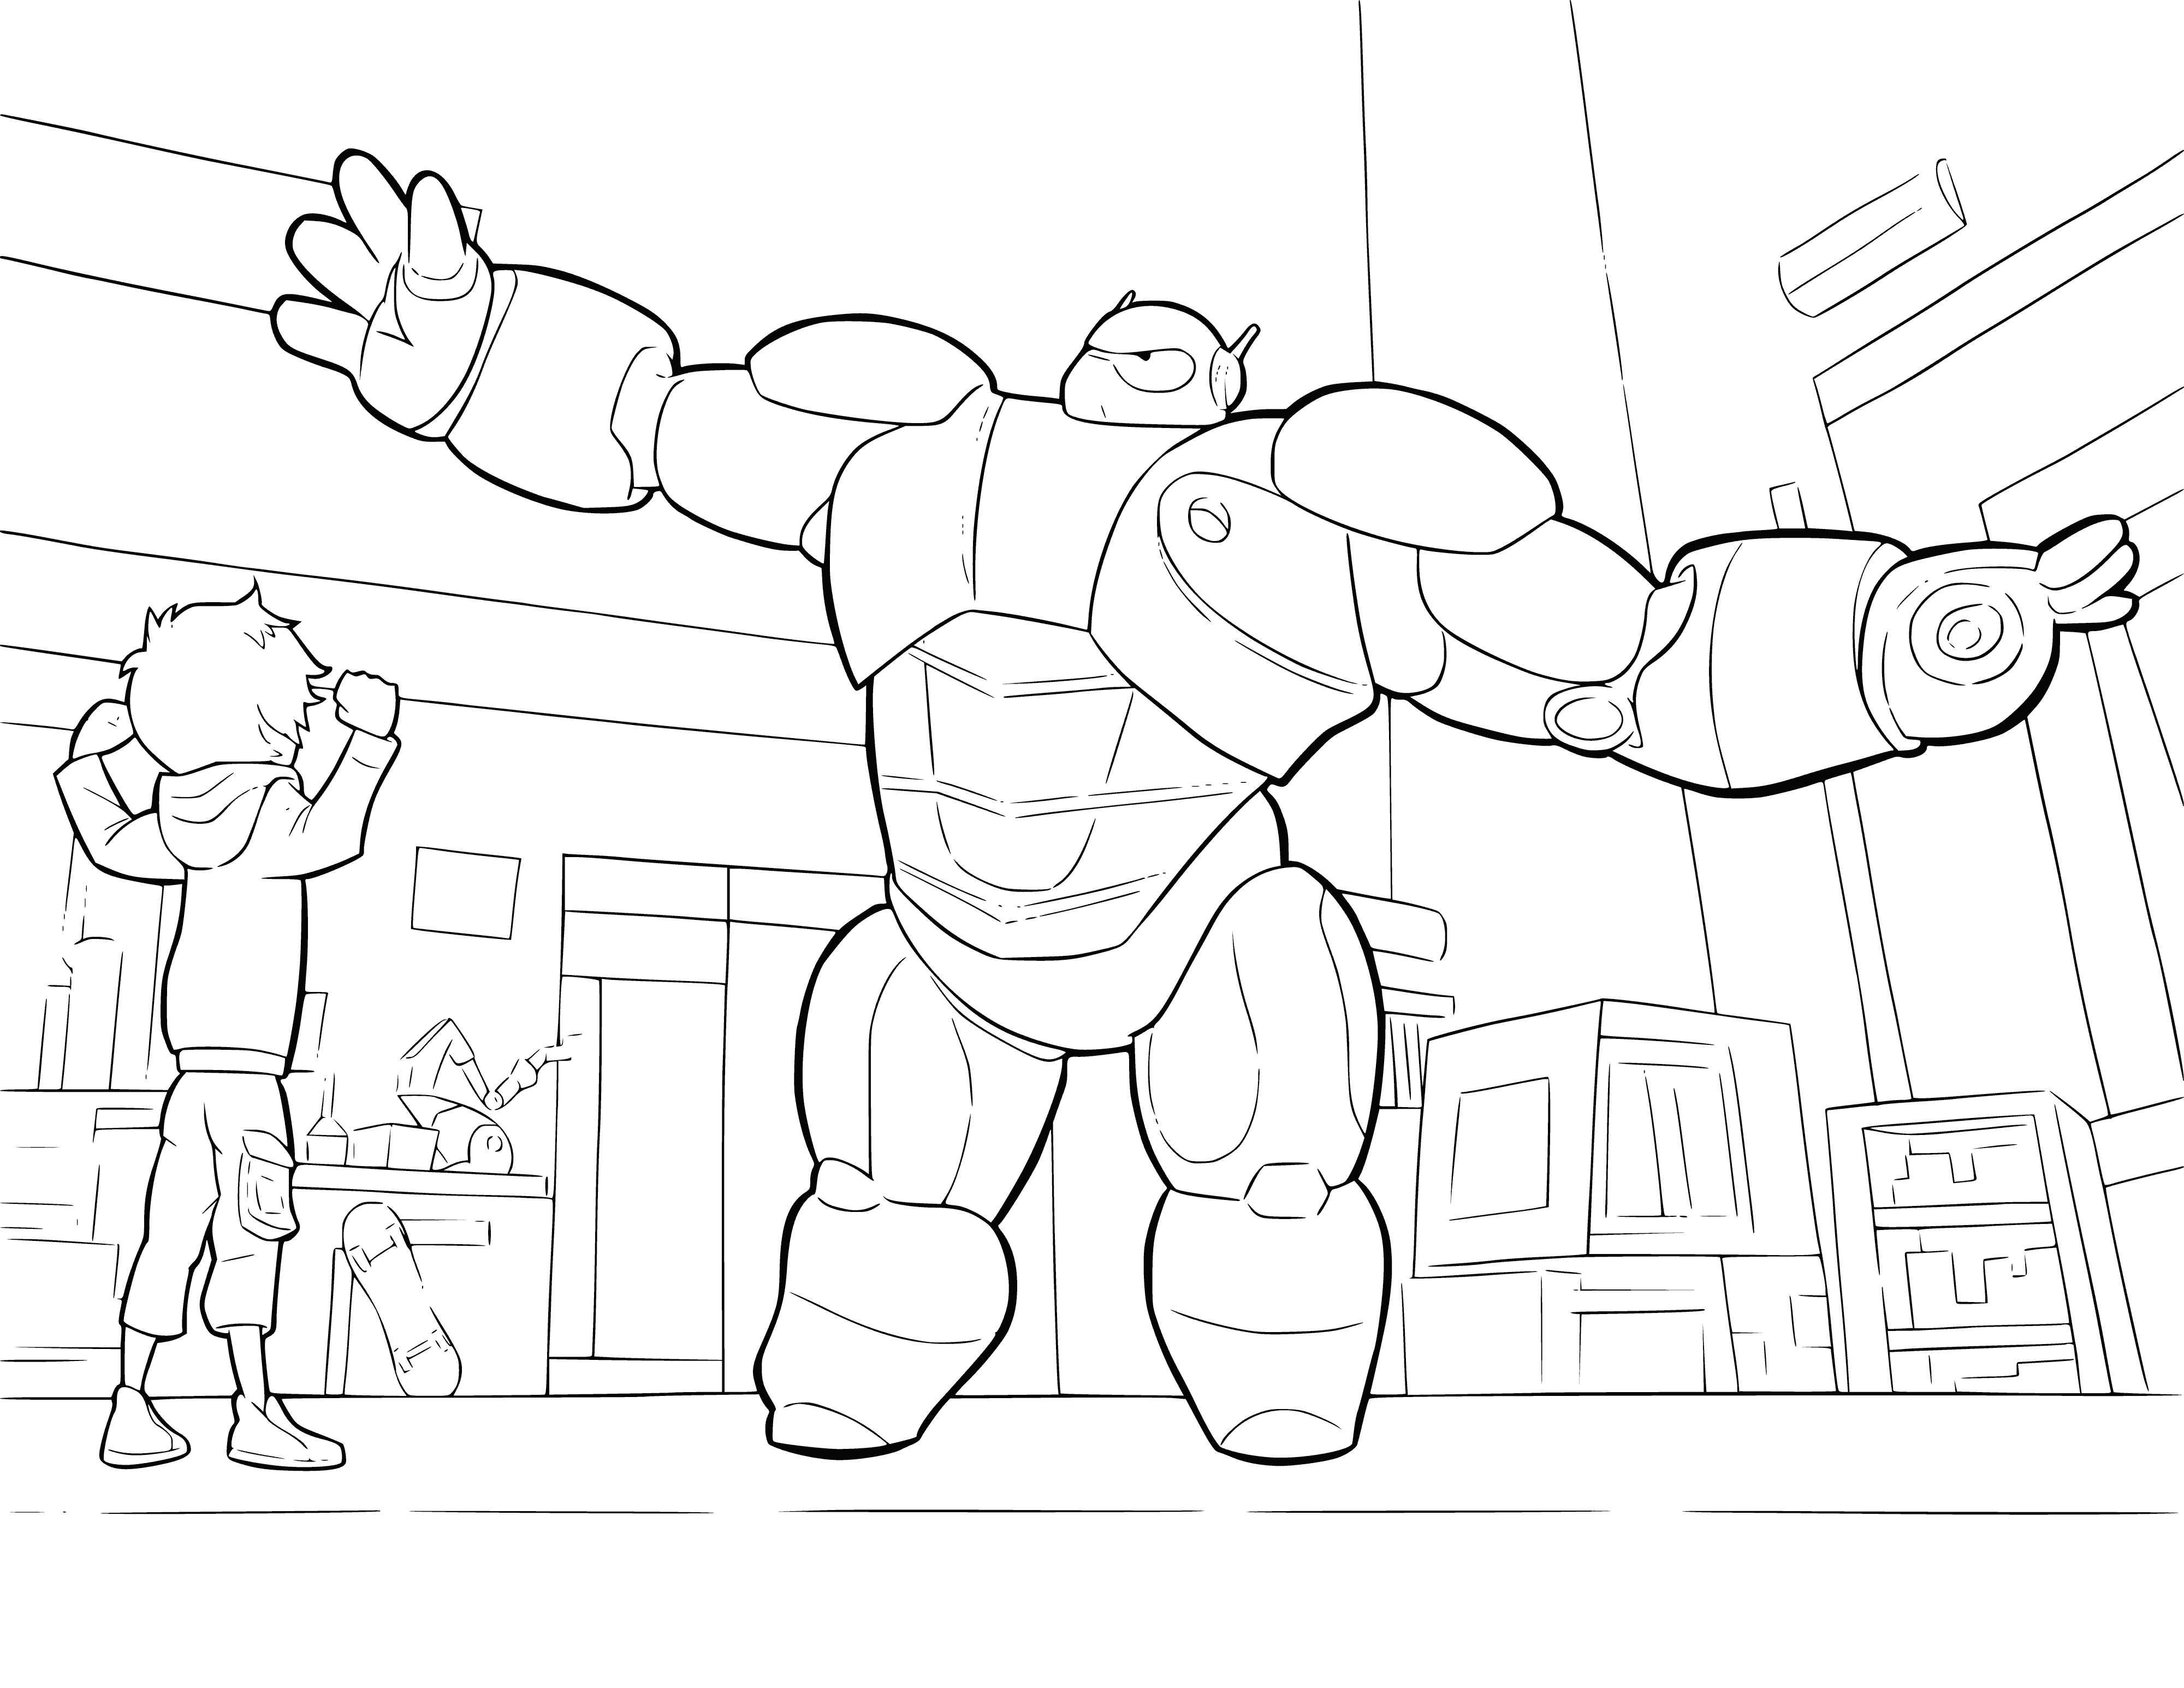 coloring page: Baymax is floating with fists clenched and cape flowing, ready to protect the city in the background. #BigHero6